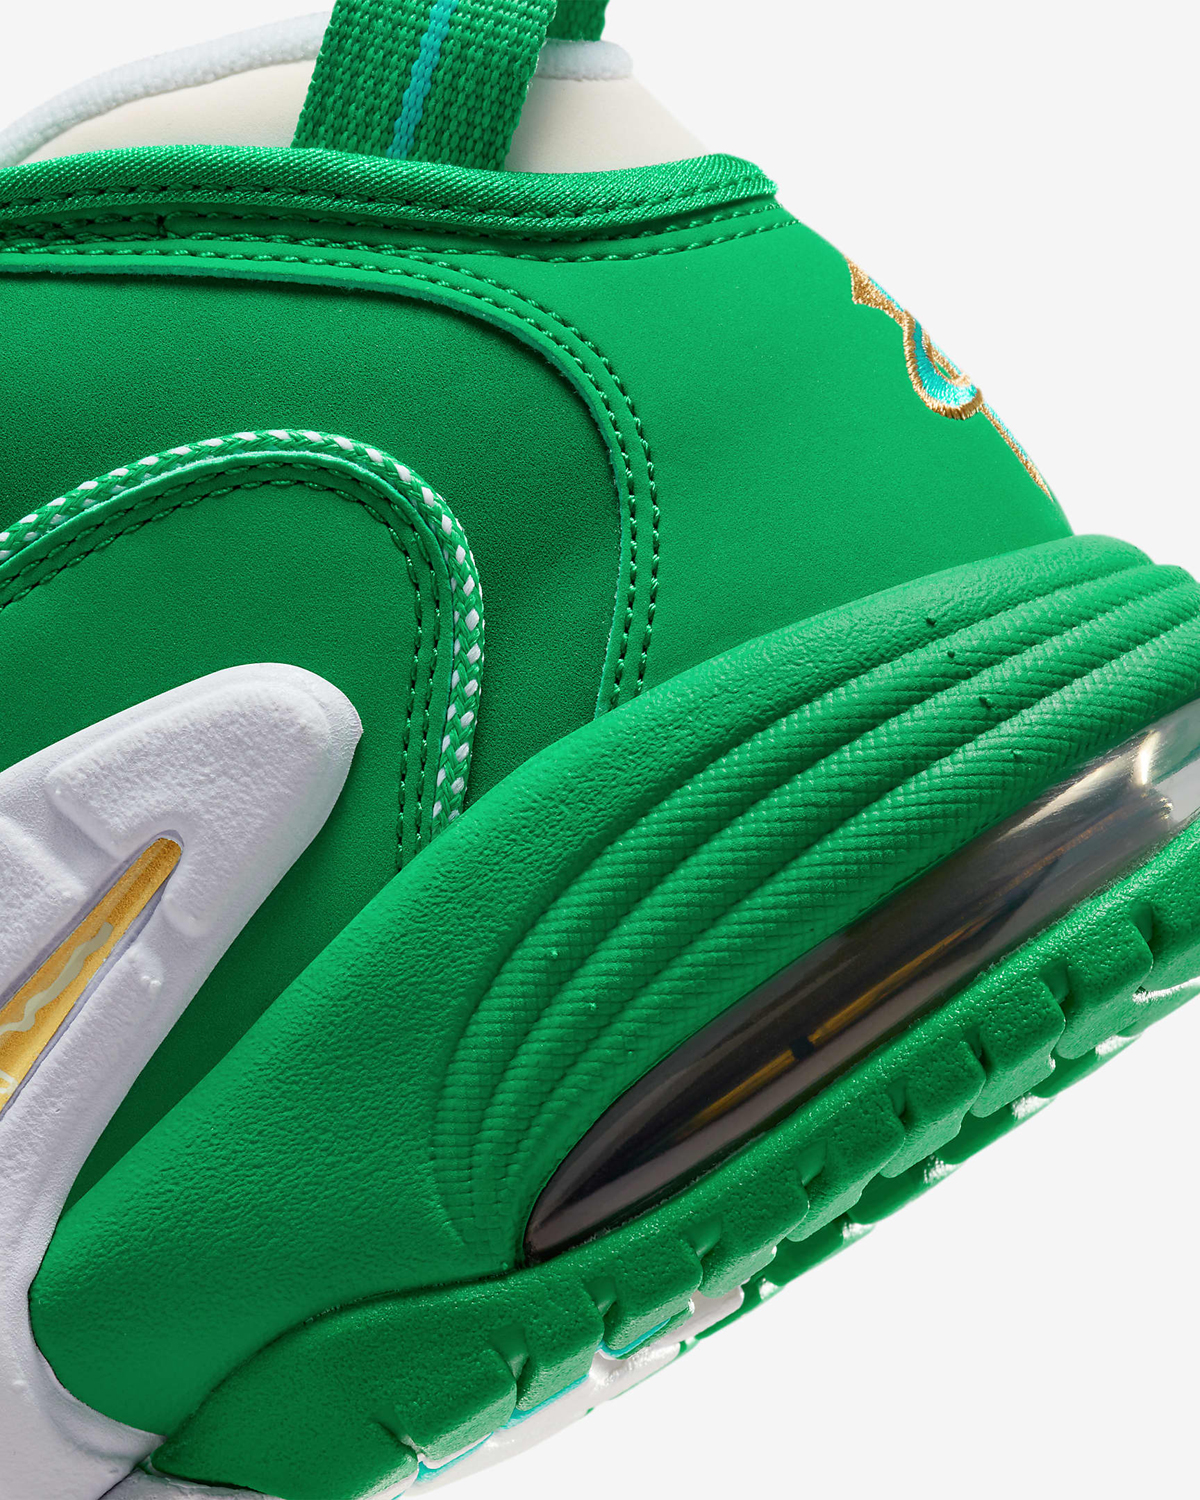 Nike-Air-Max-Penny-Stadium-Green-Release-Date-8